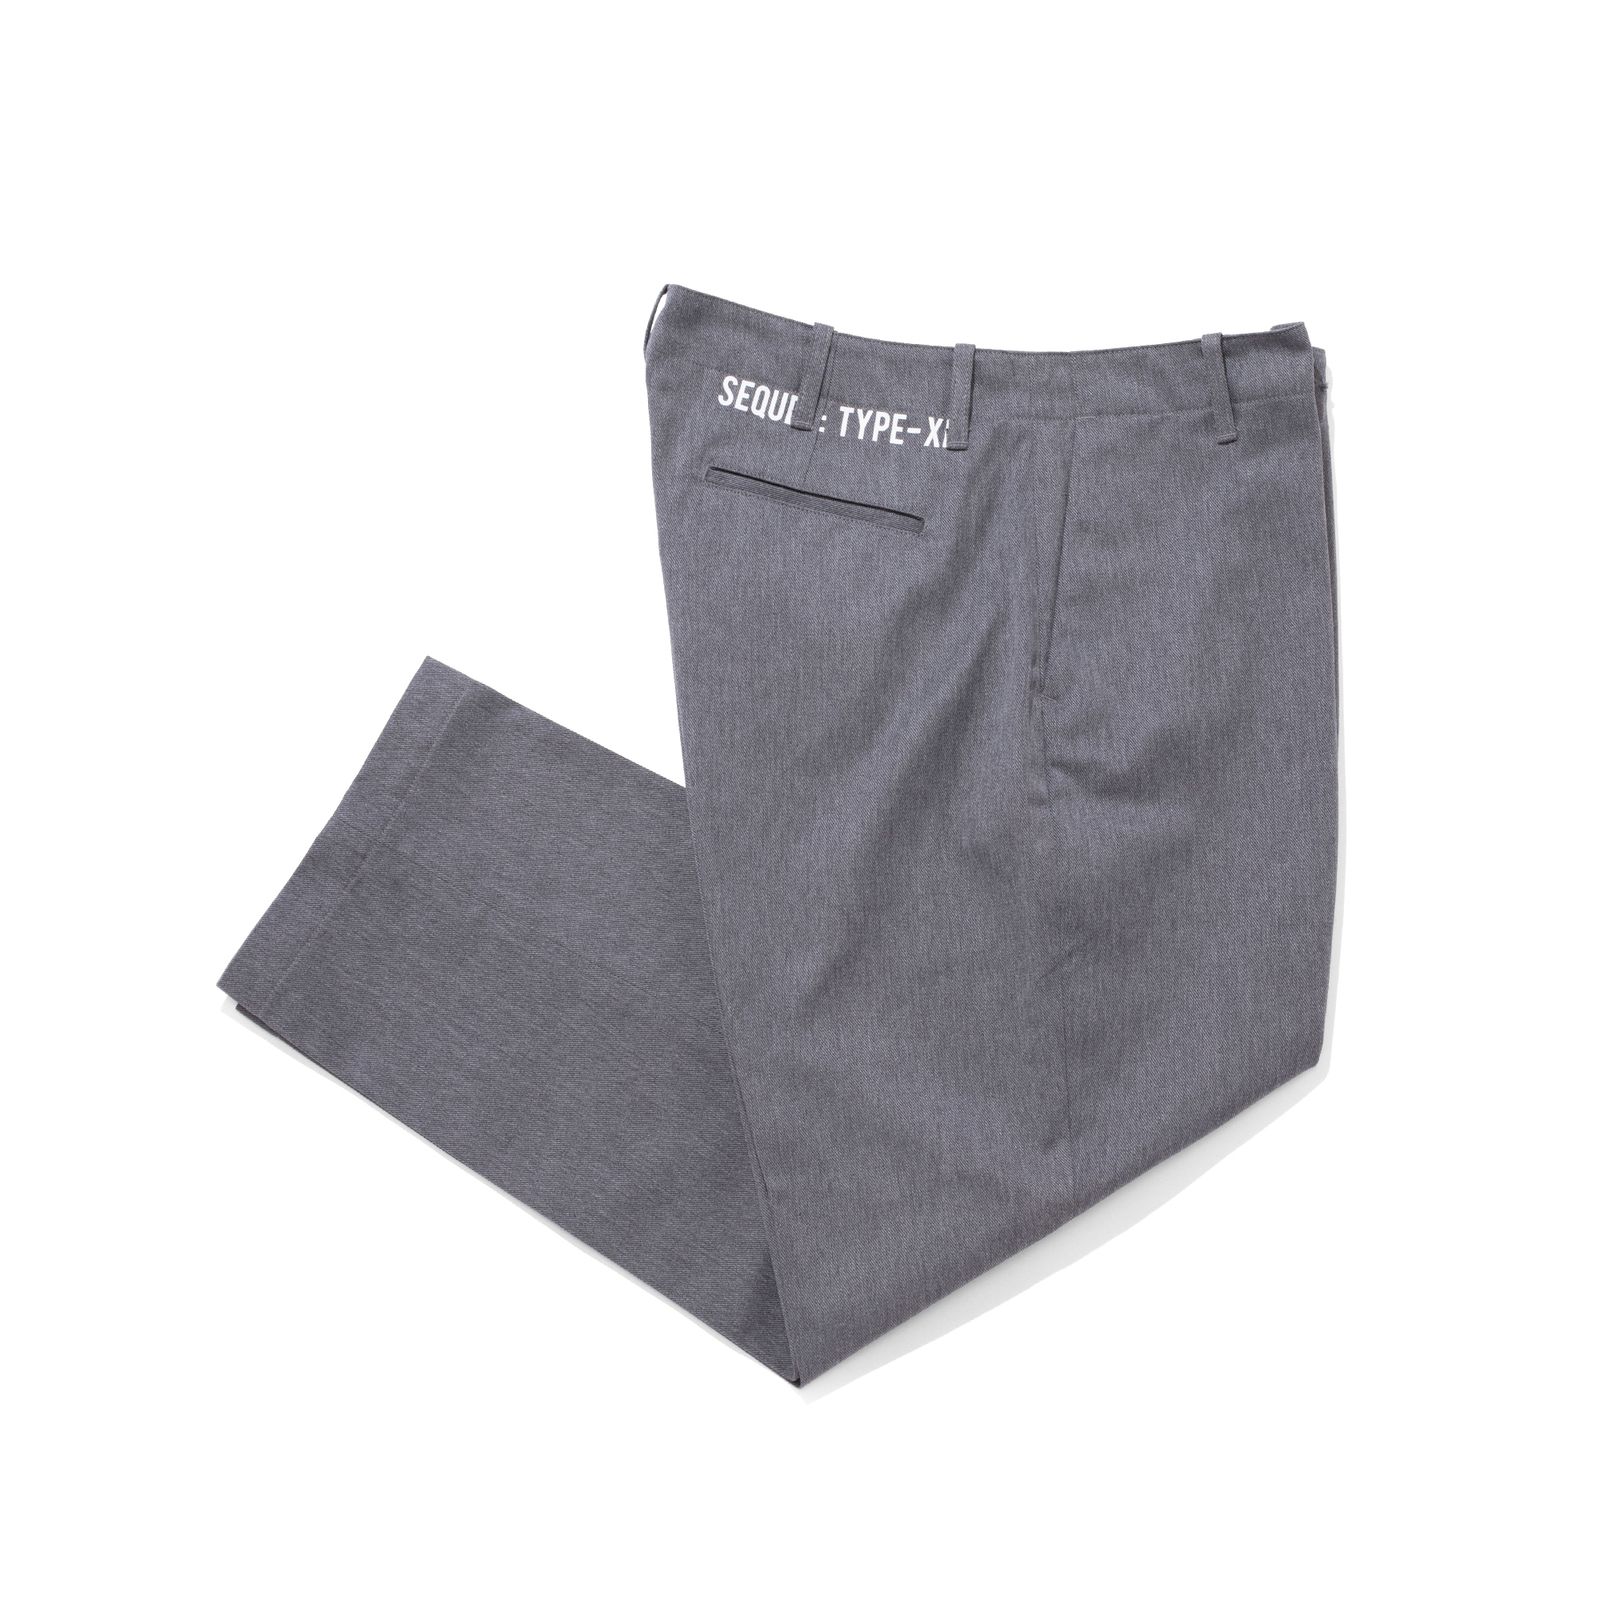 SEQUEL - SQ-23AW-PT-01 CHINO PANTS (TYPE-XF) GRAY | River